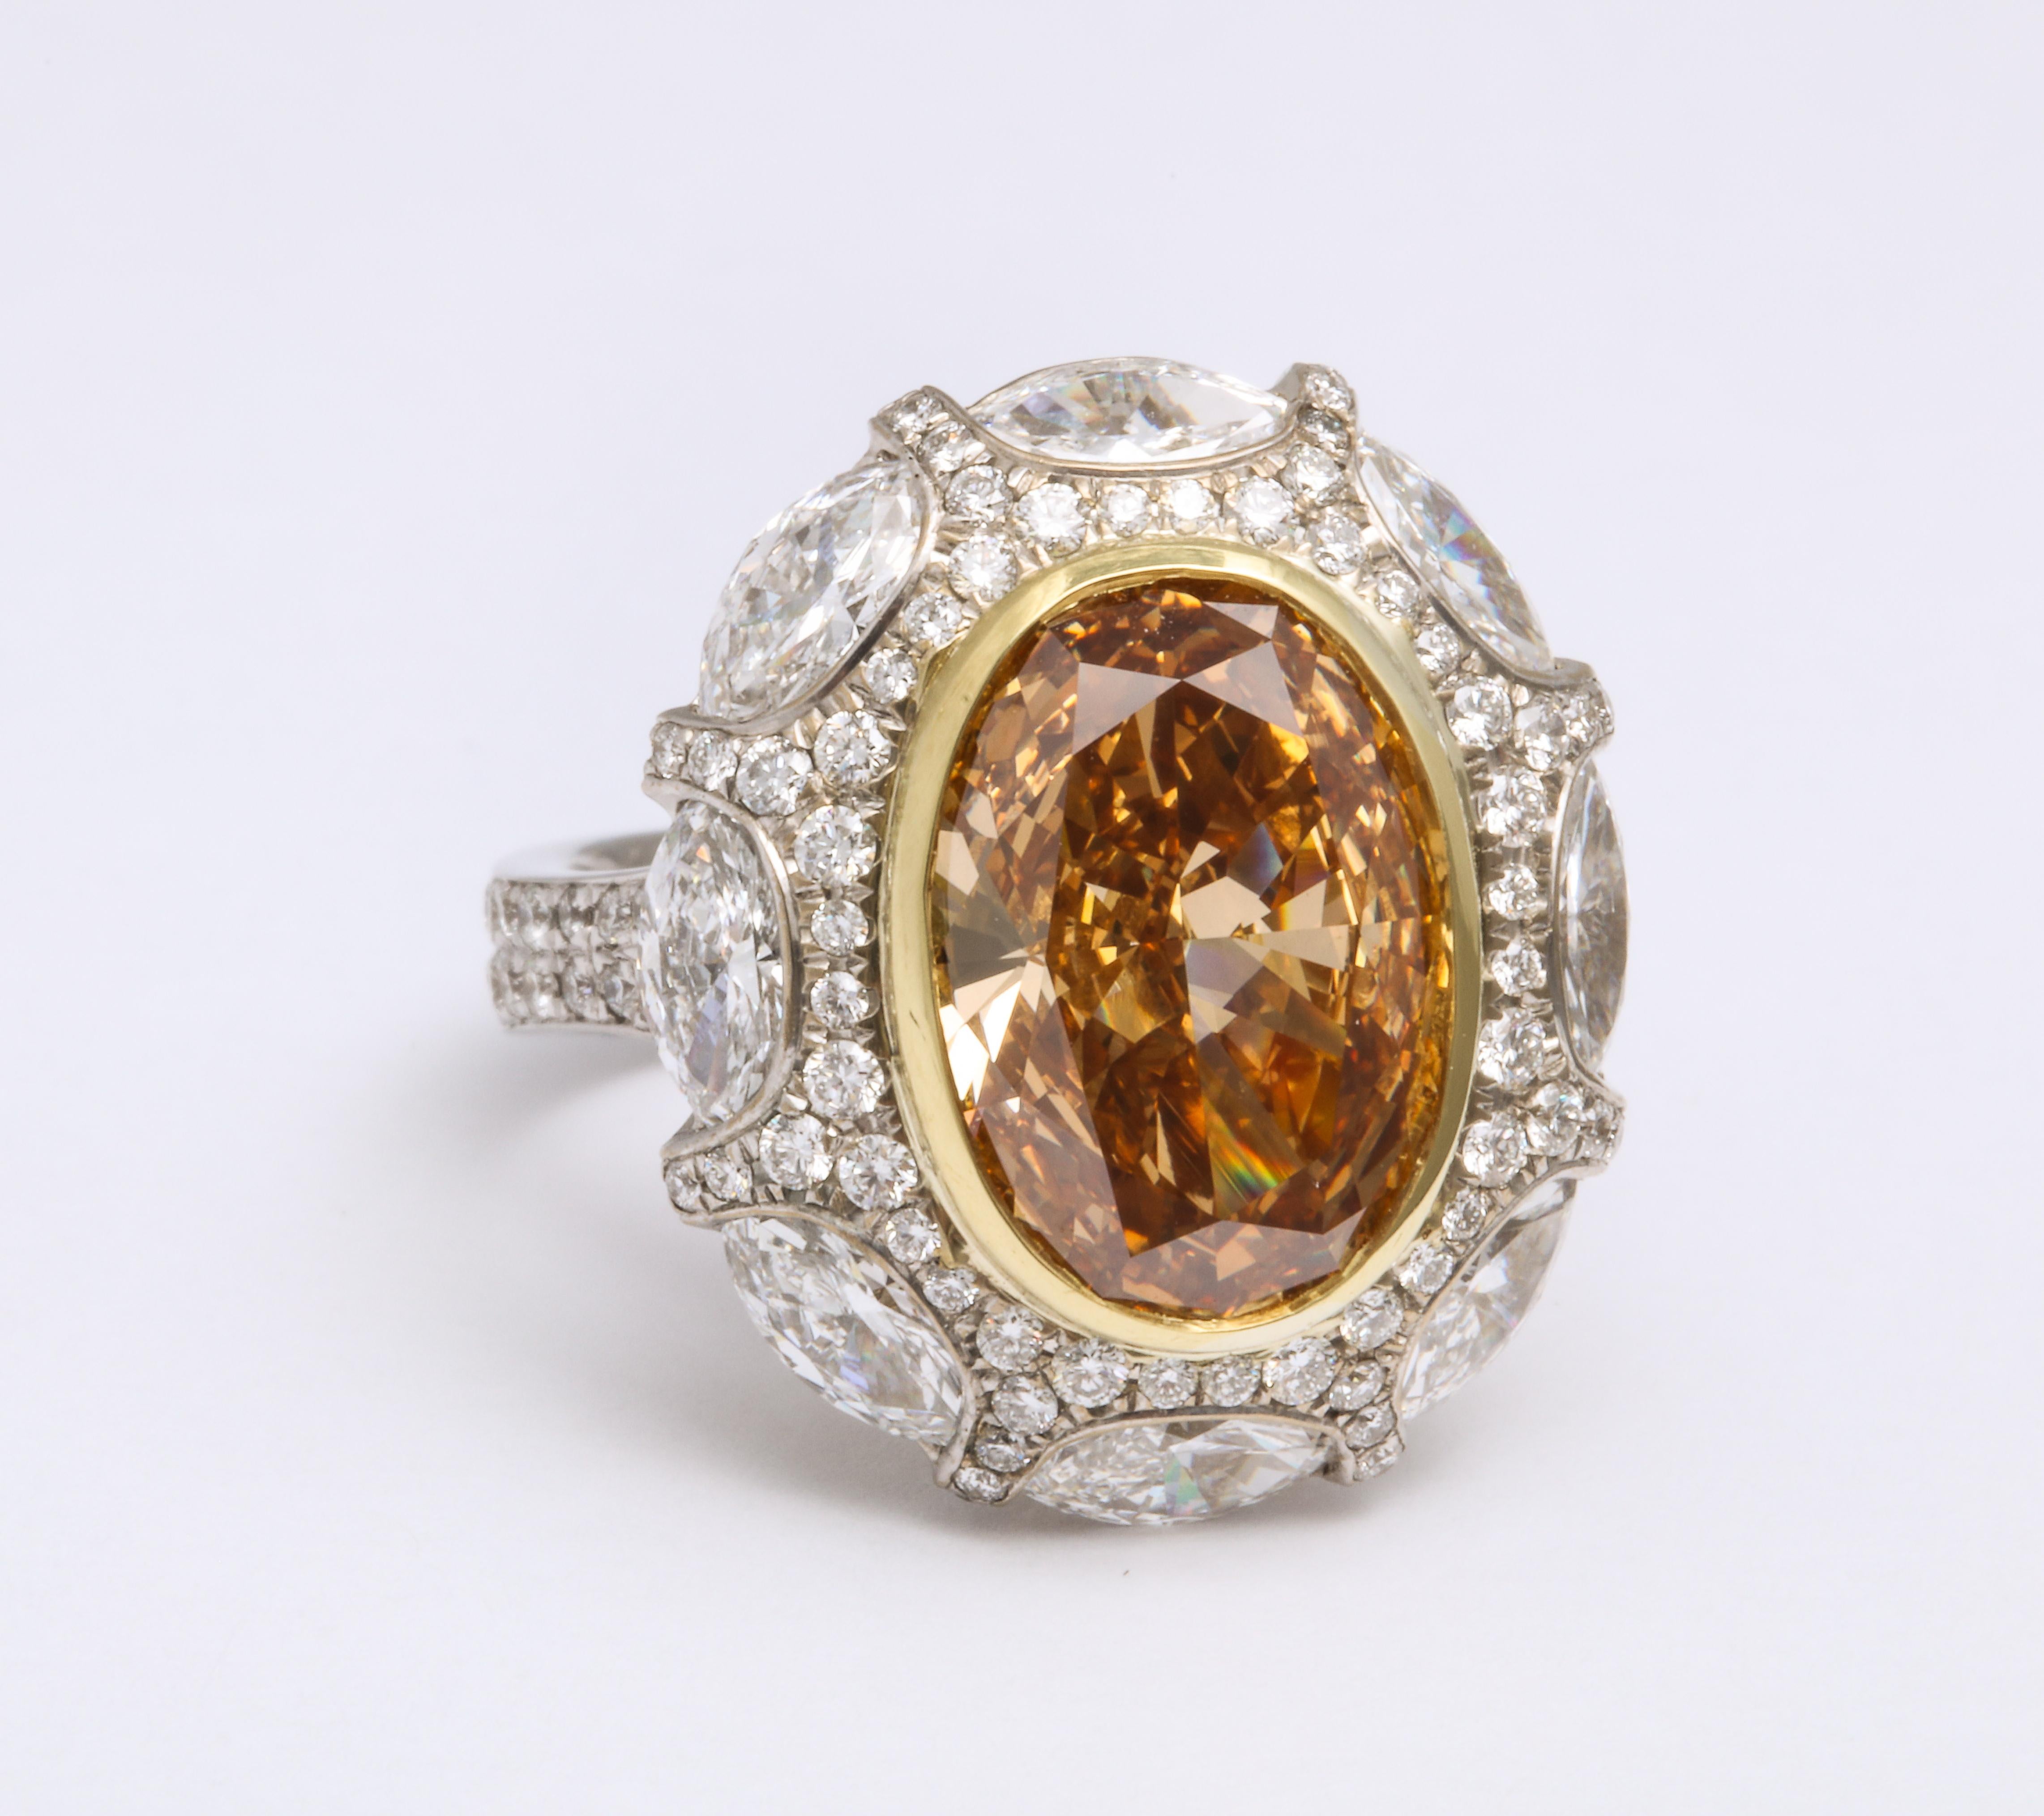 A unique and truly interesting orange diamond, this 5.34 carat oval gem comes with a GIA report describing it as a natural color diamond; Fancy Deep Brownish Yellow Orange.  The GIA report also describes this oval diamond as being a VVS2 clarity,